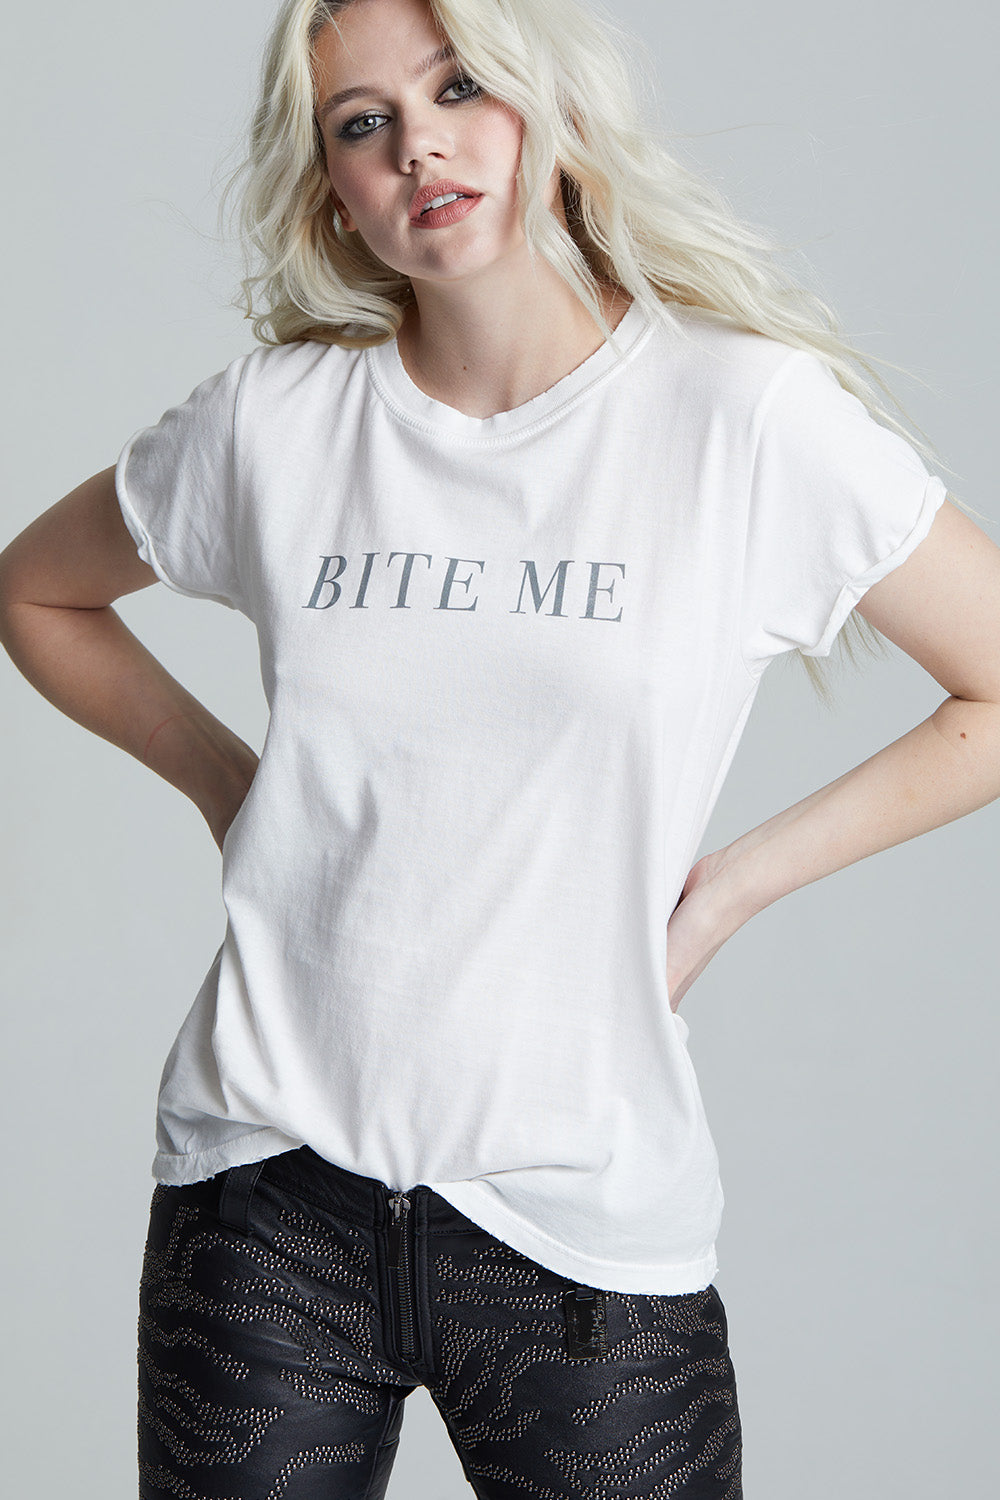 Bite Me White Fitted Tee